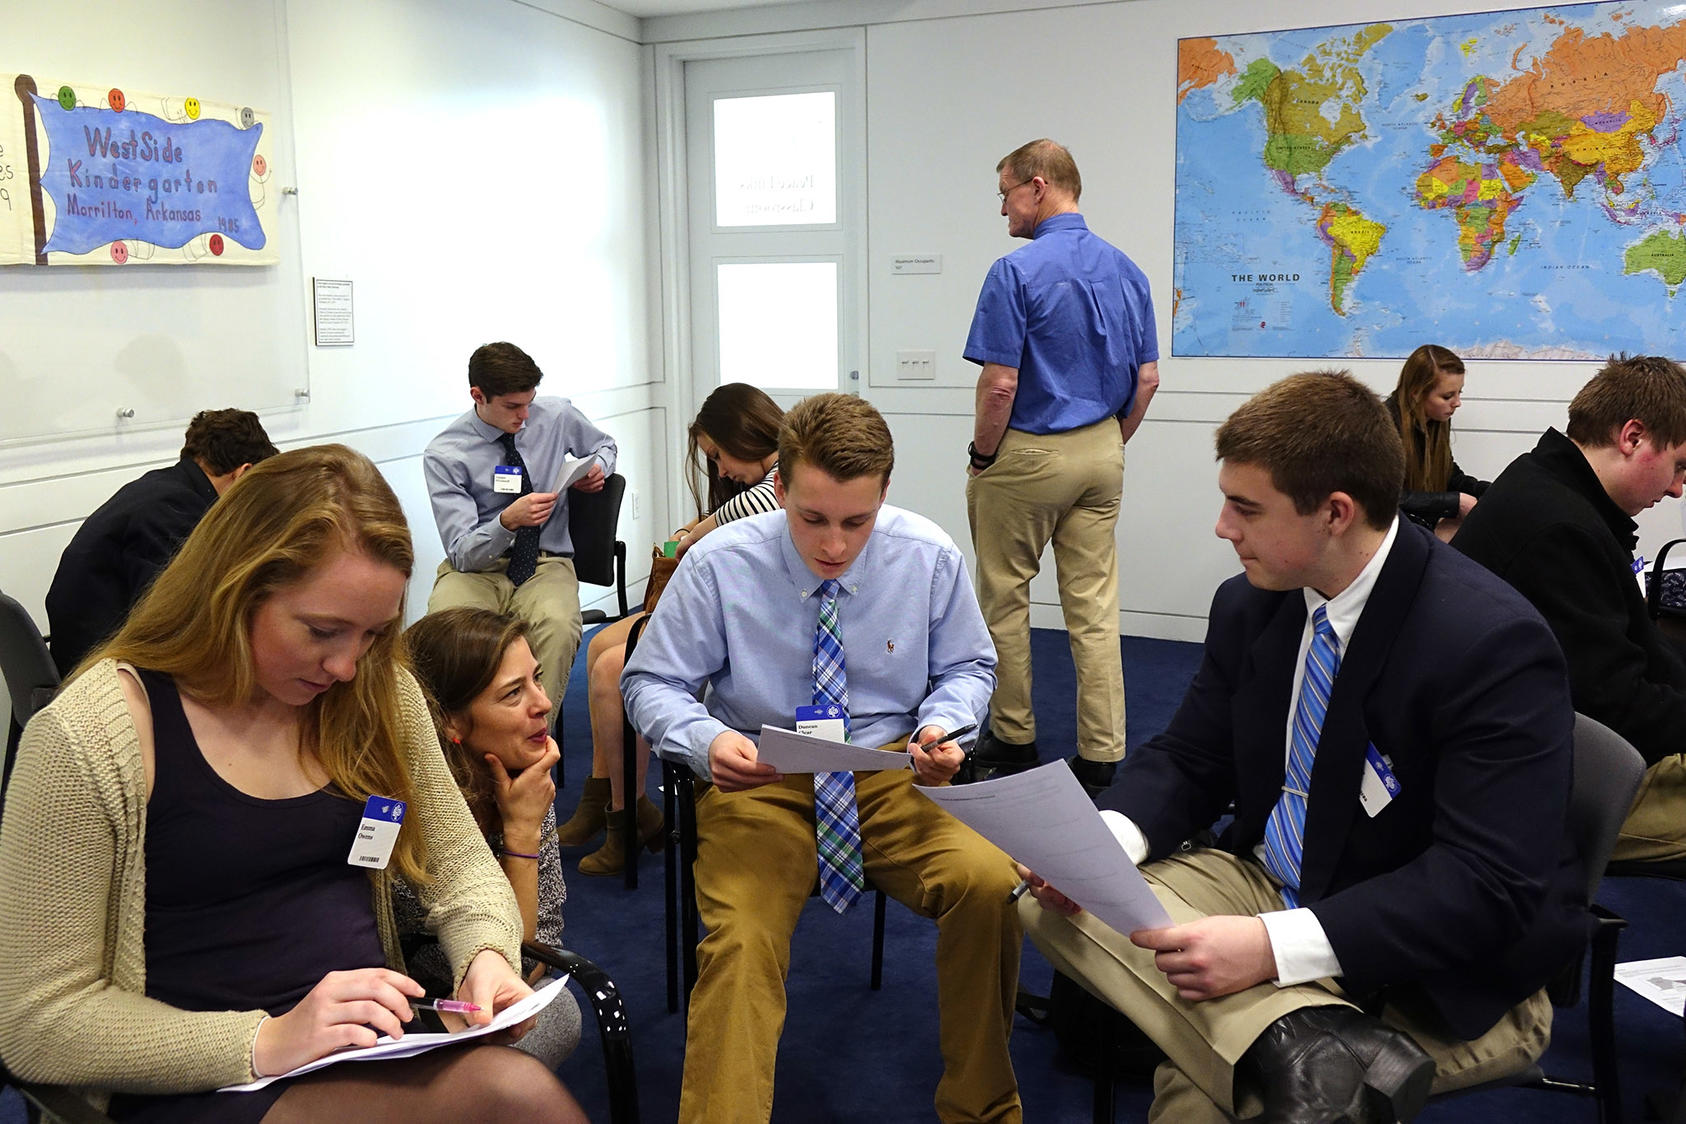 Students from Champlain Valley Union High School participate in an educational workshop at the U.S. Institute of Peace.